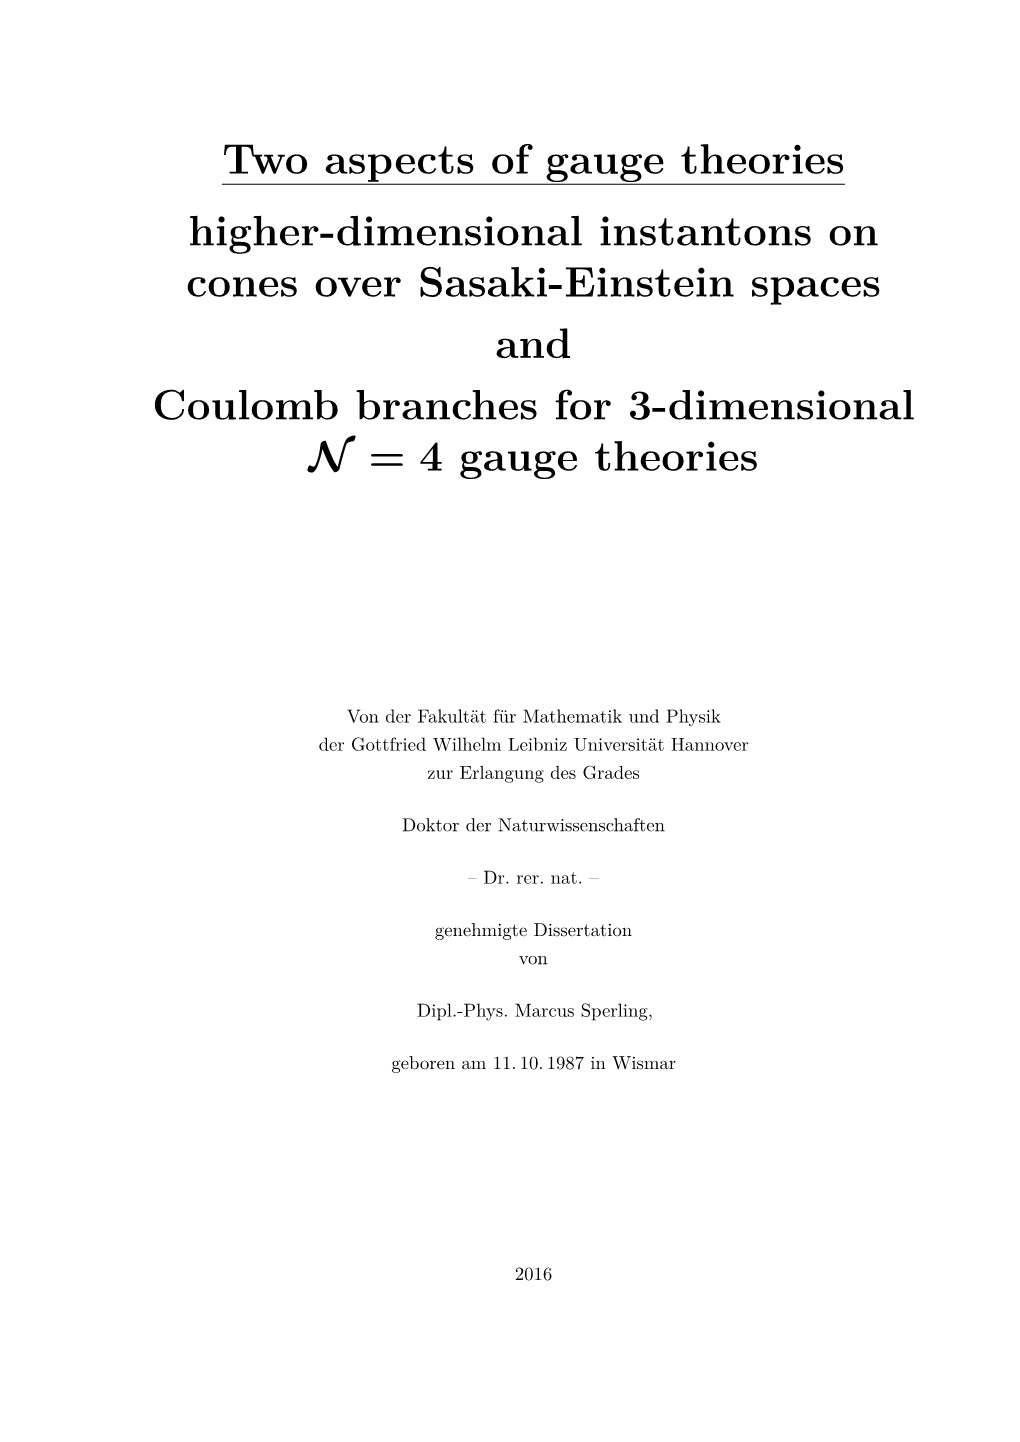 Higher-Dimensional Instantons on Cones Over Sasaki-Einstein Spaces and Coulomb Branches for 3-Dimensional N = 4 Gauge Theories